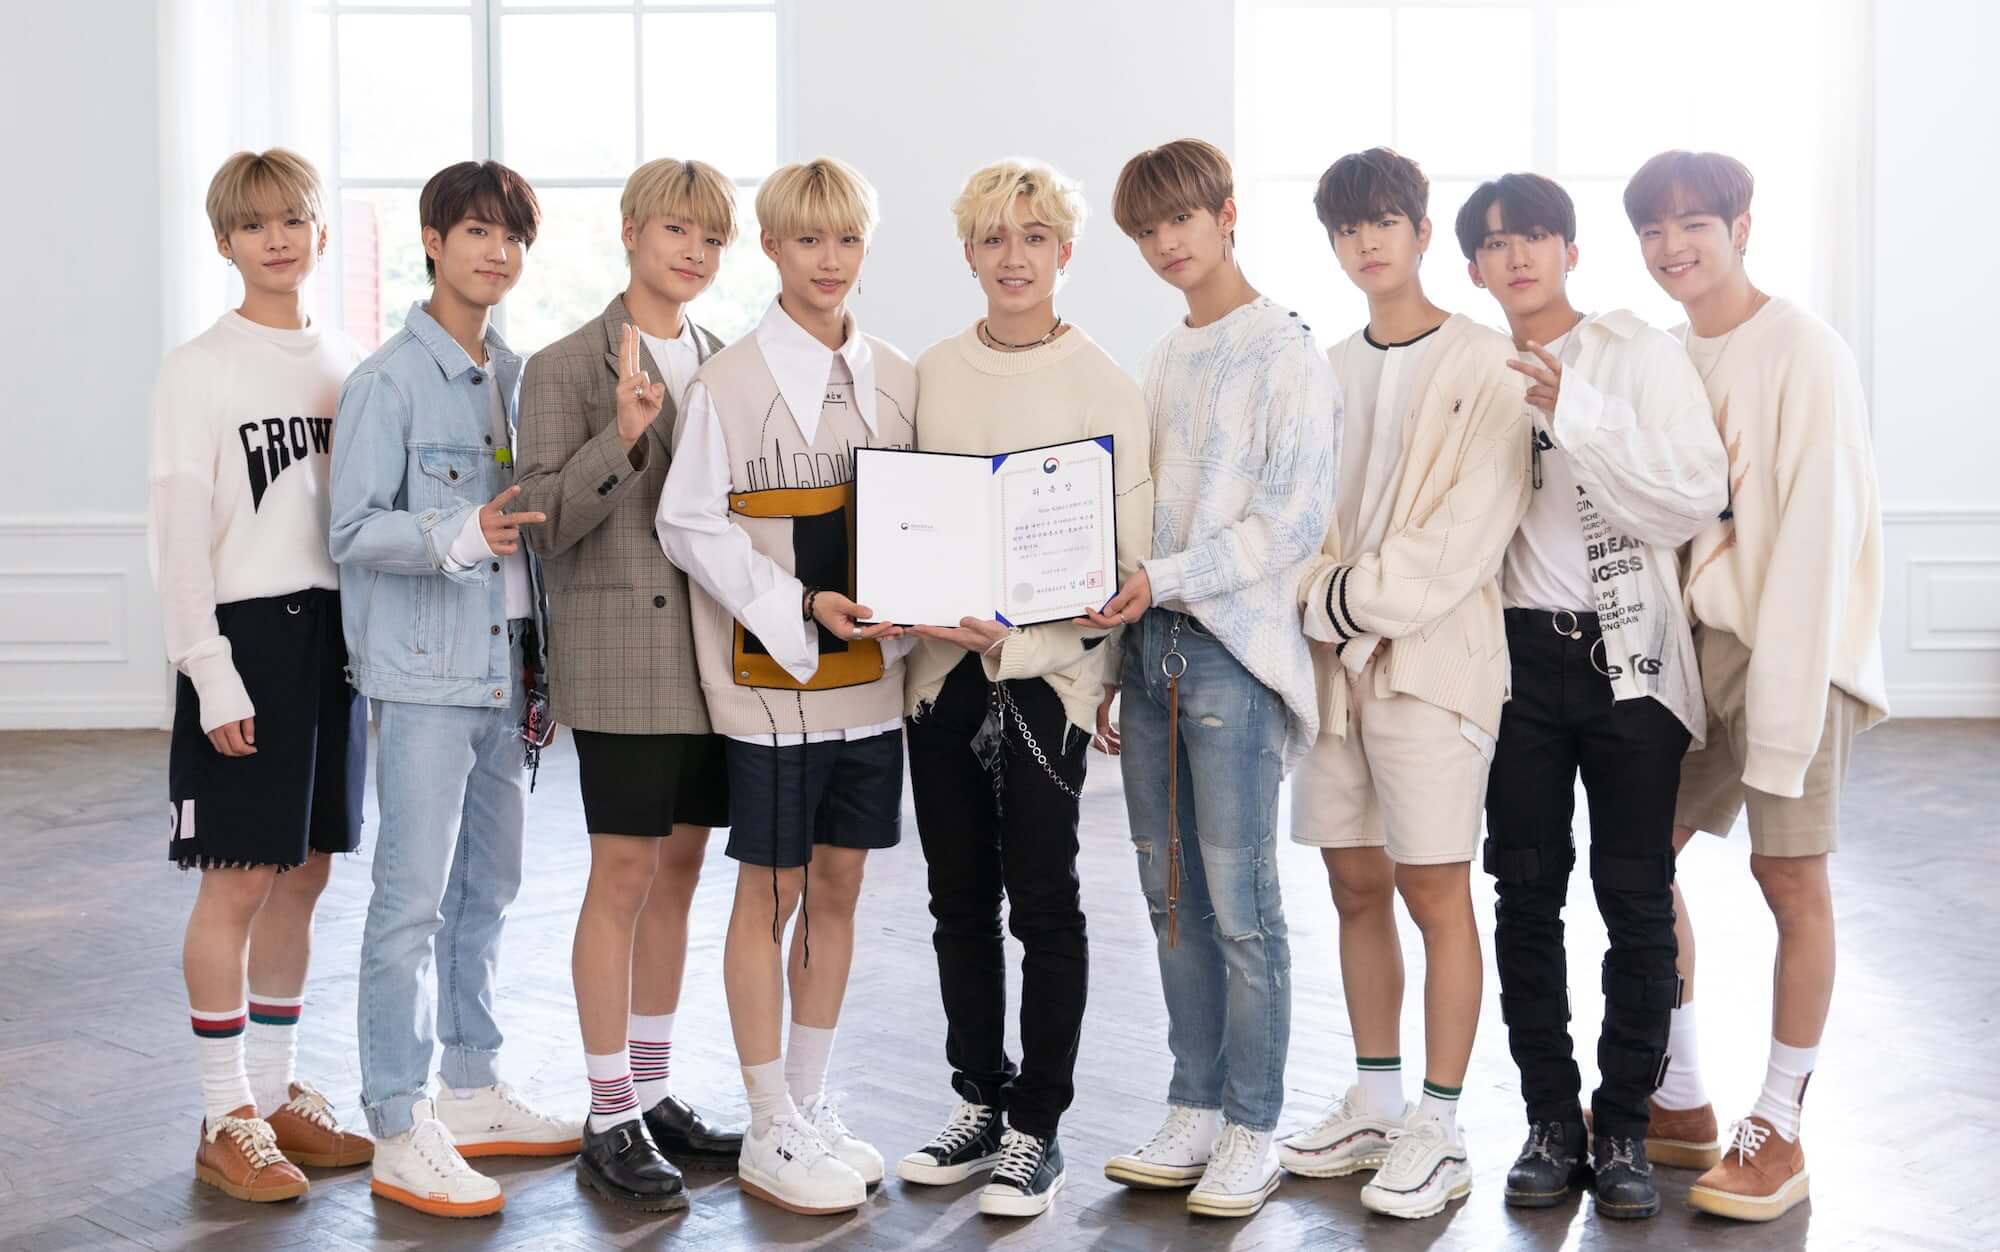 Stray Kids has choosen to become Information Service and Korean Culture